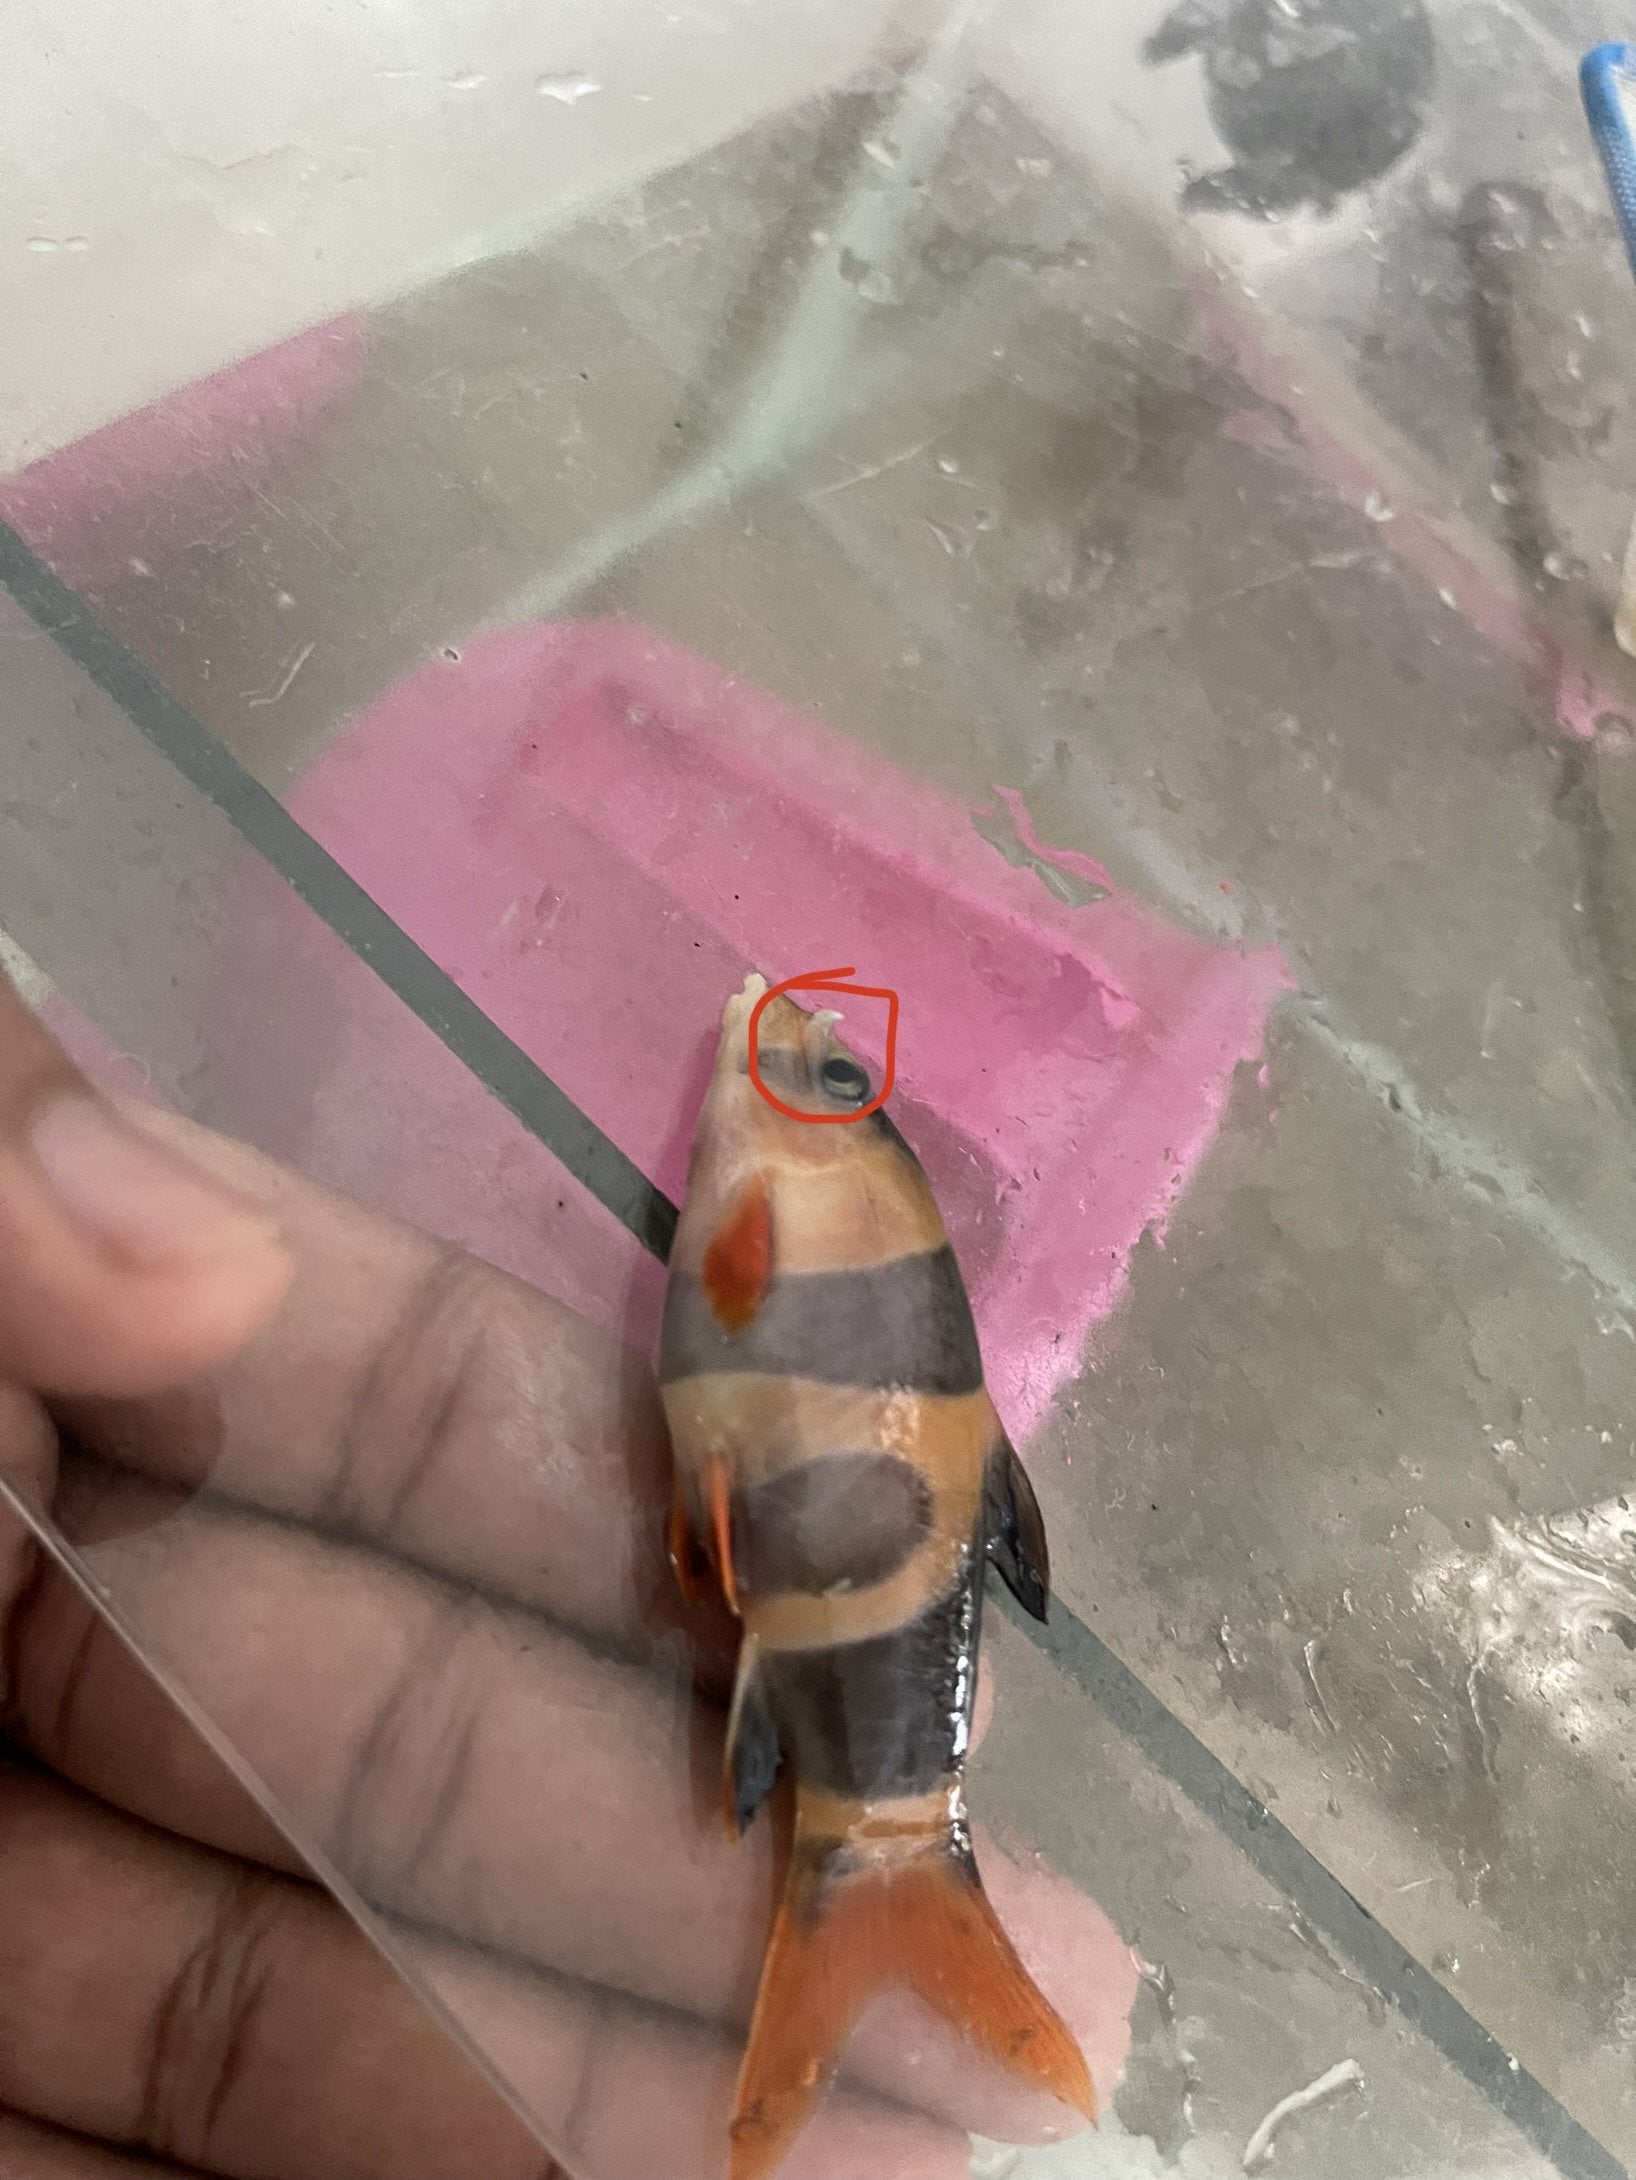 Dead clown loach with something sharp pointing out from side of head??